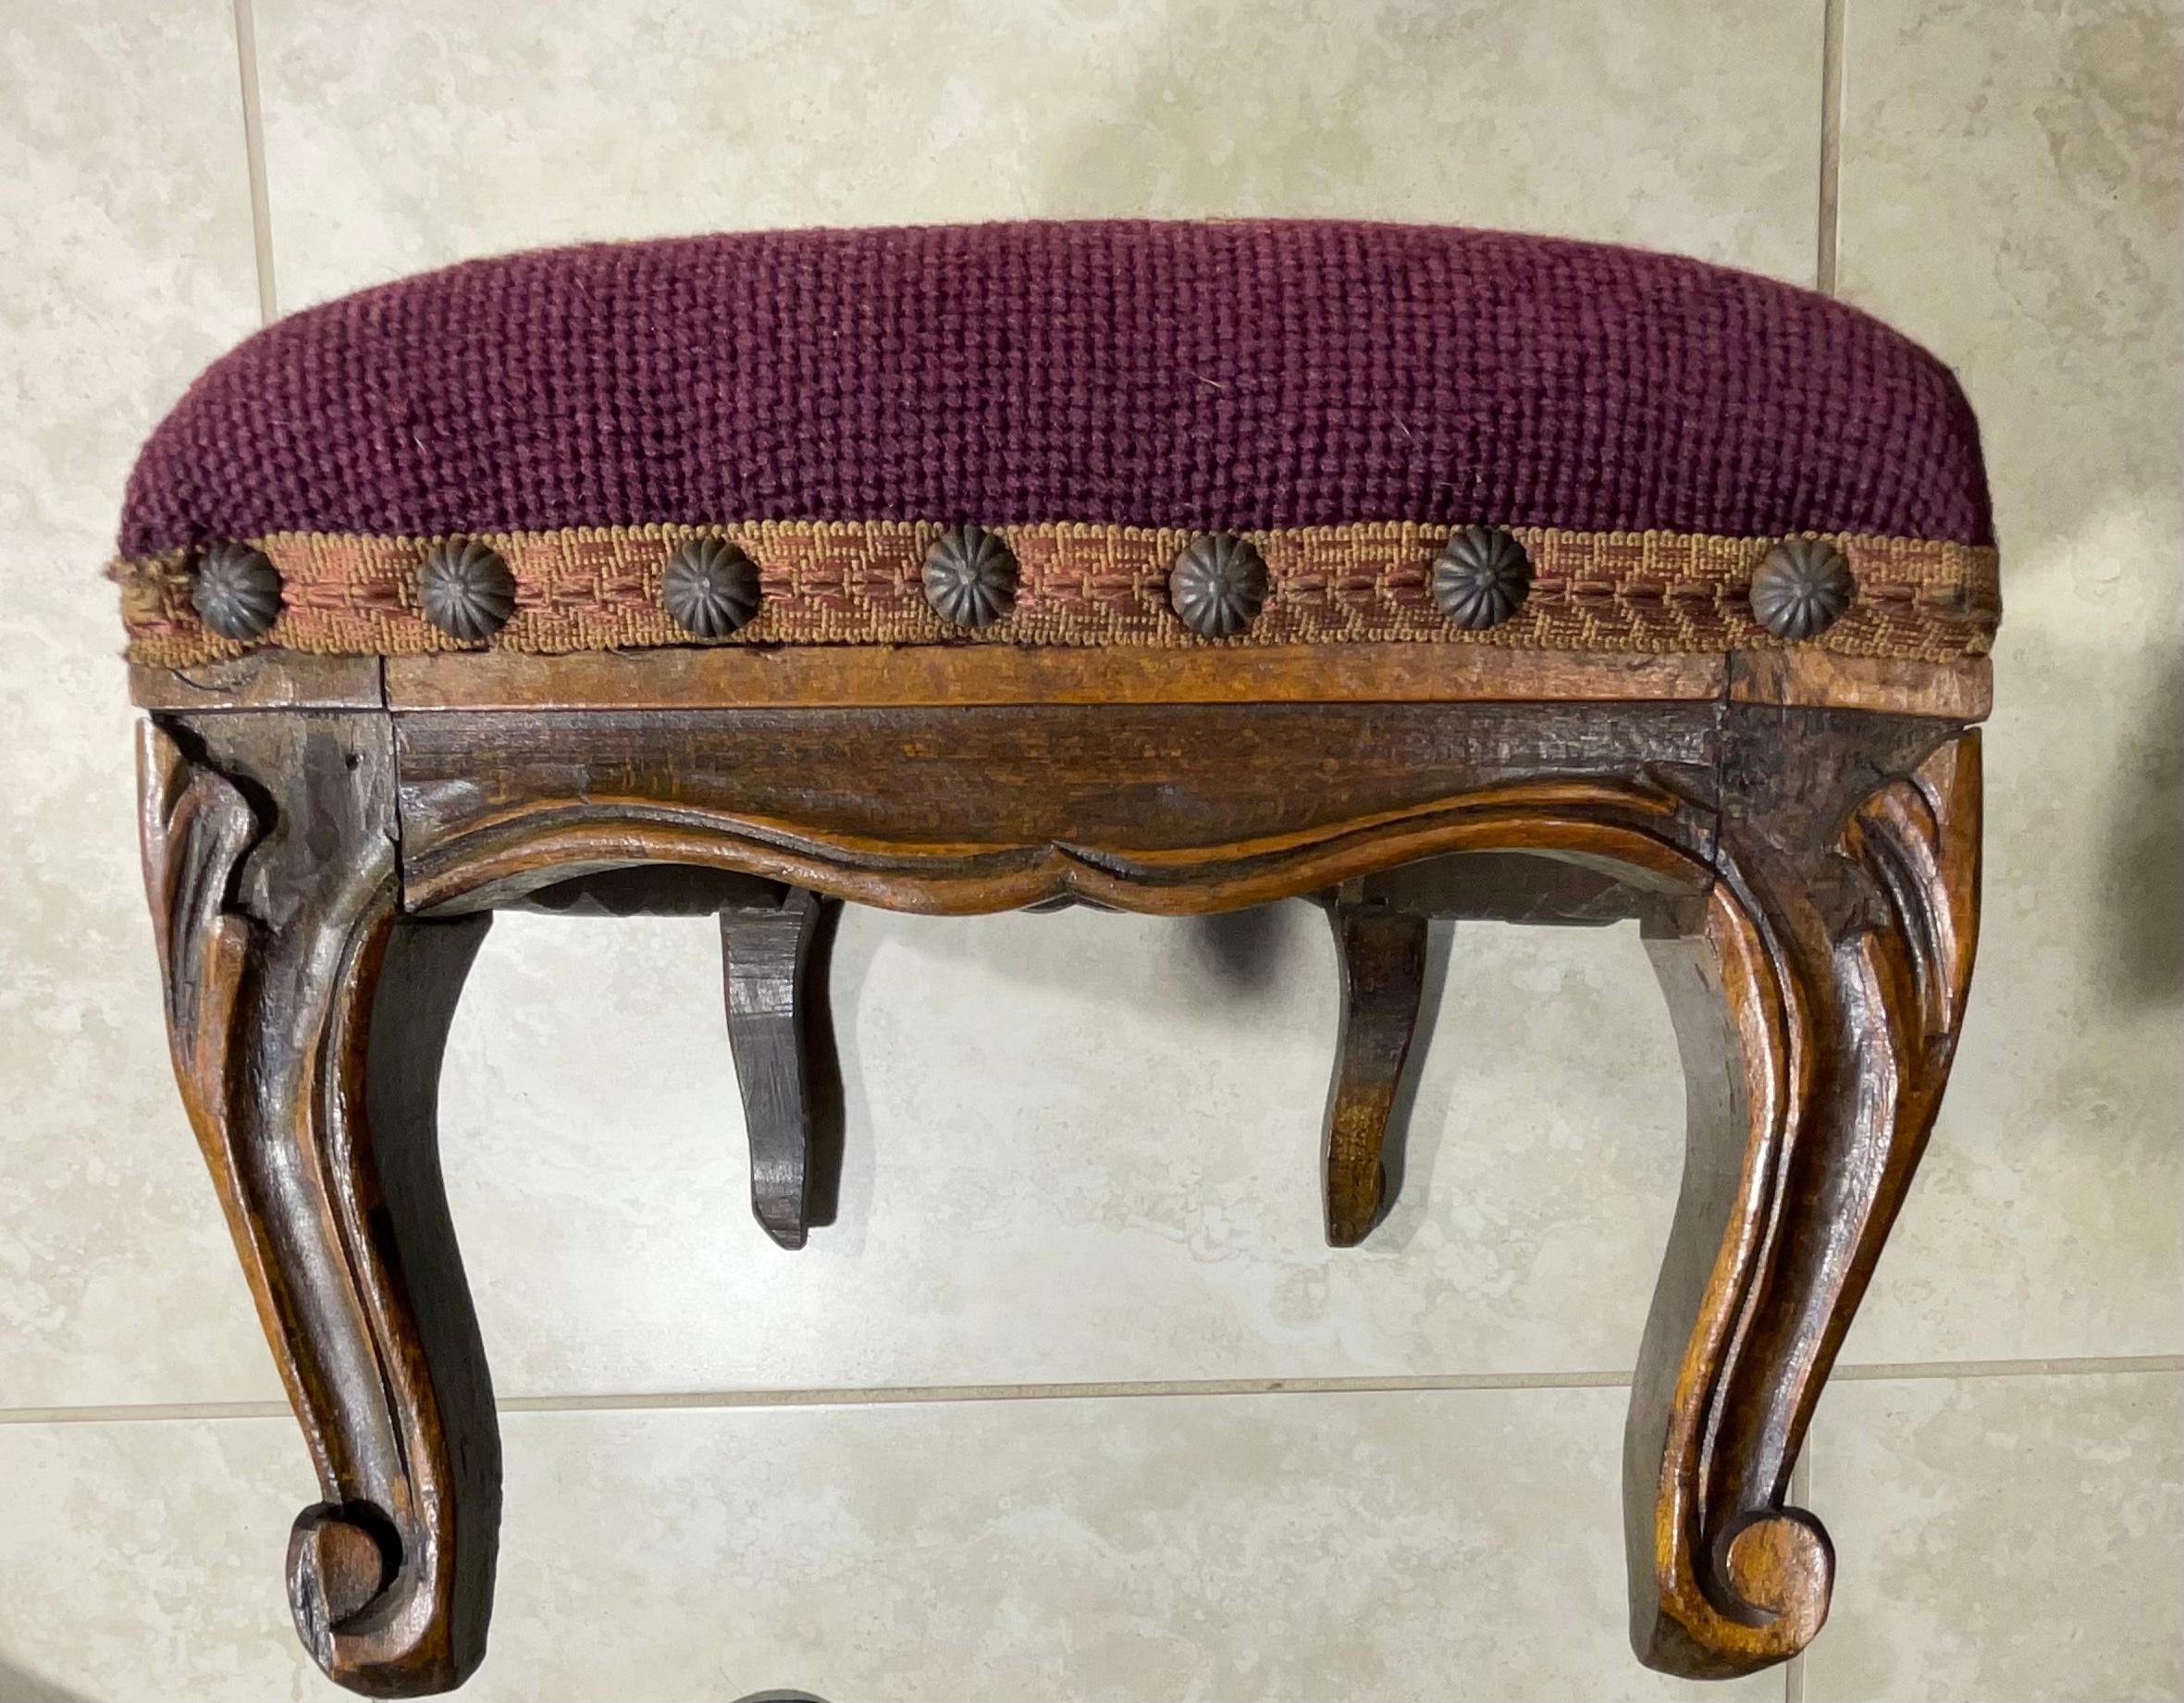 Petite Antique Hand Carved Needlepoint Textile Upholstered Foot Stool In Good Condition For Sale In Delray Beach, FL